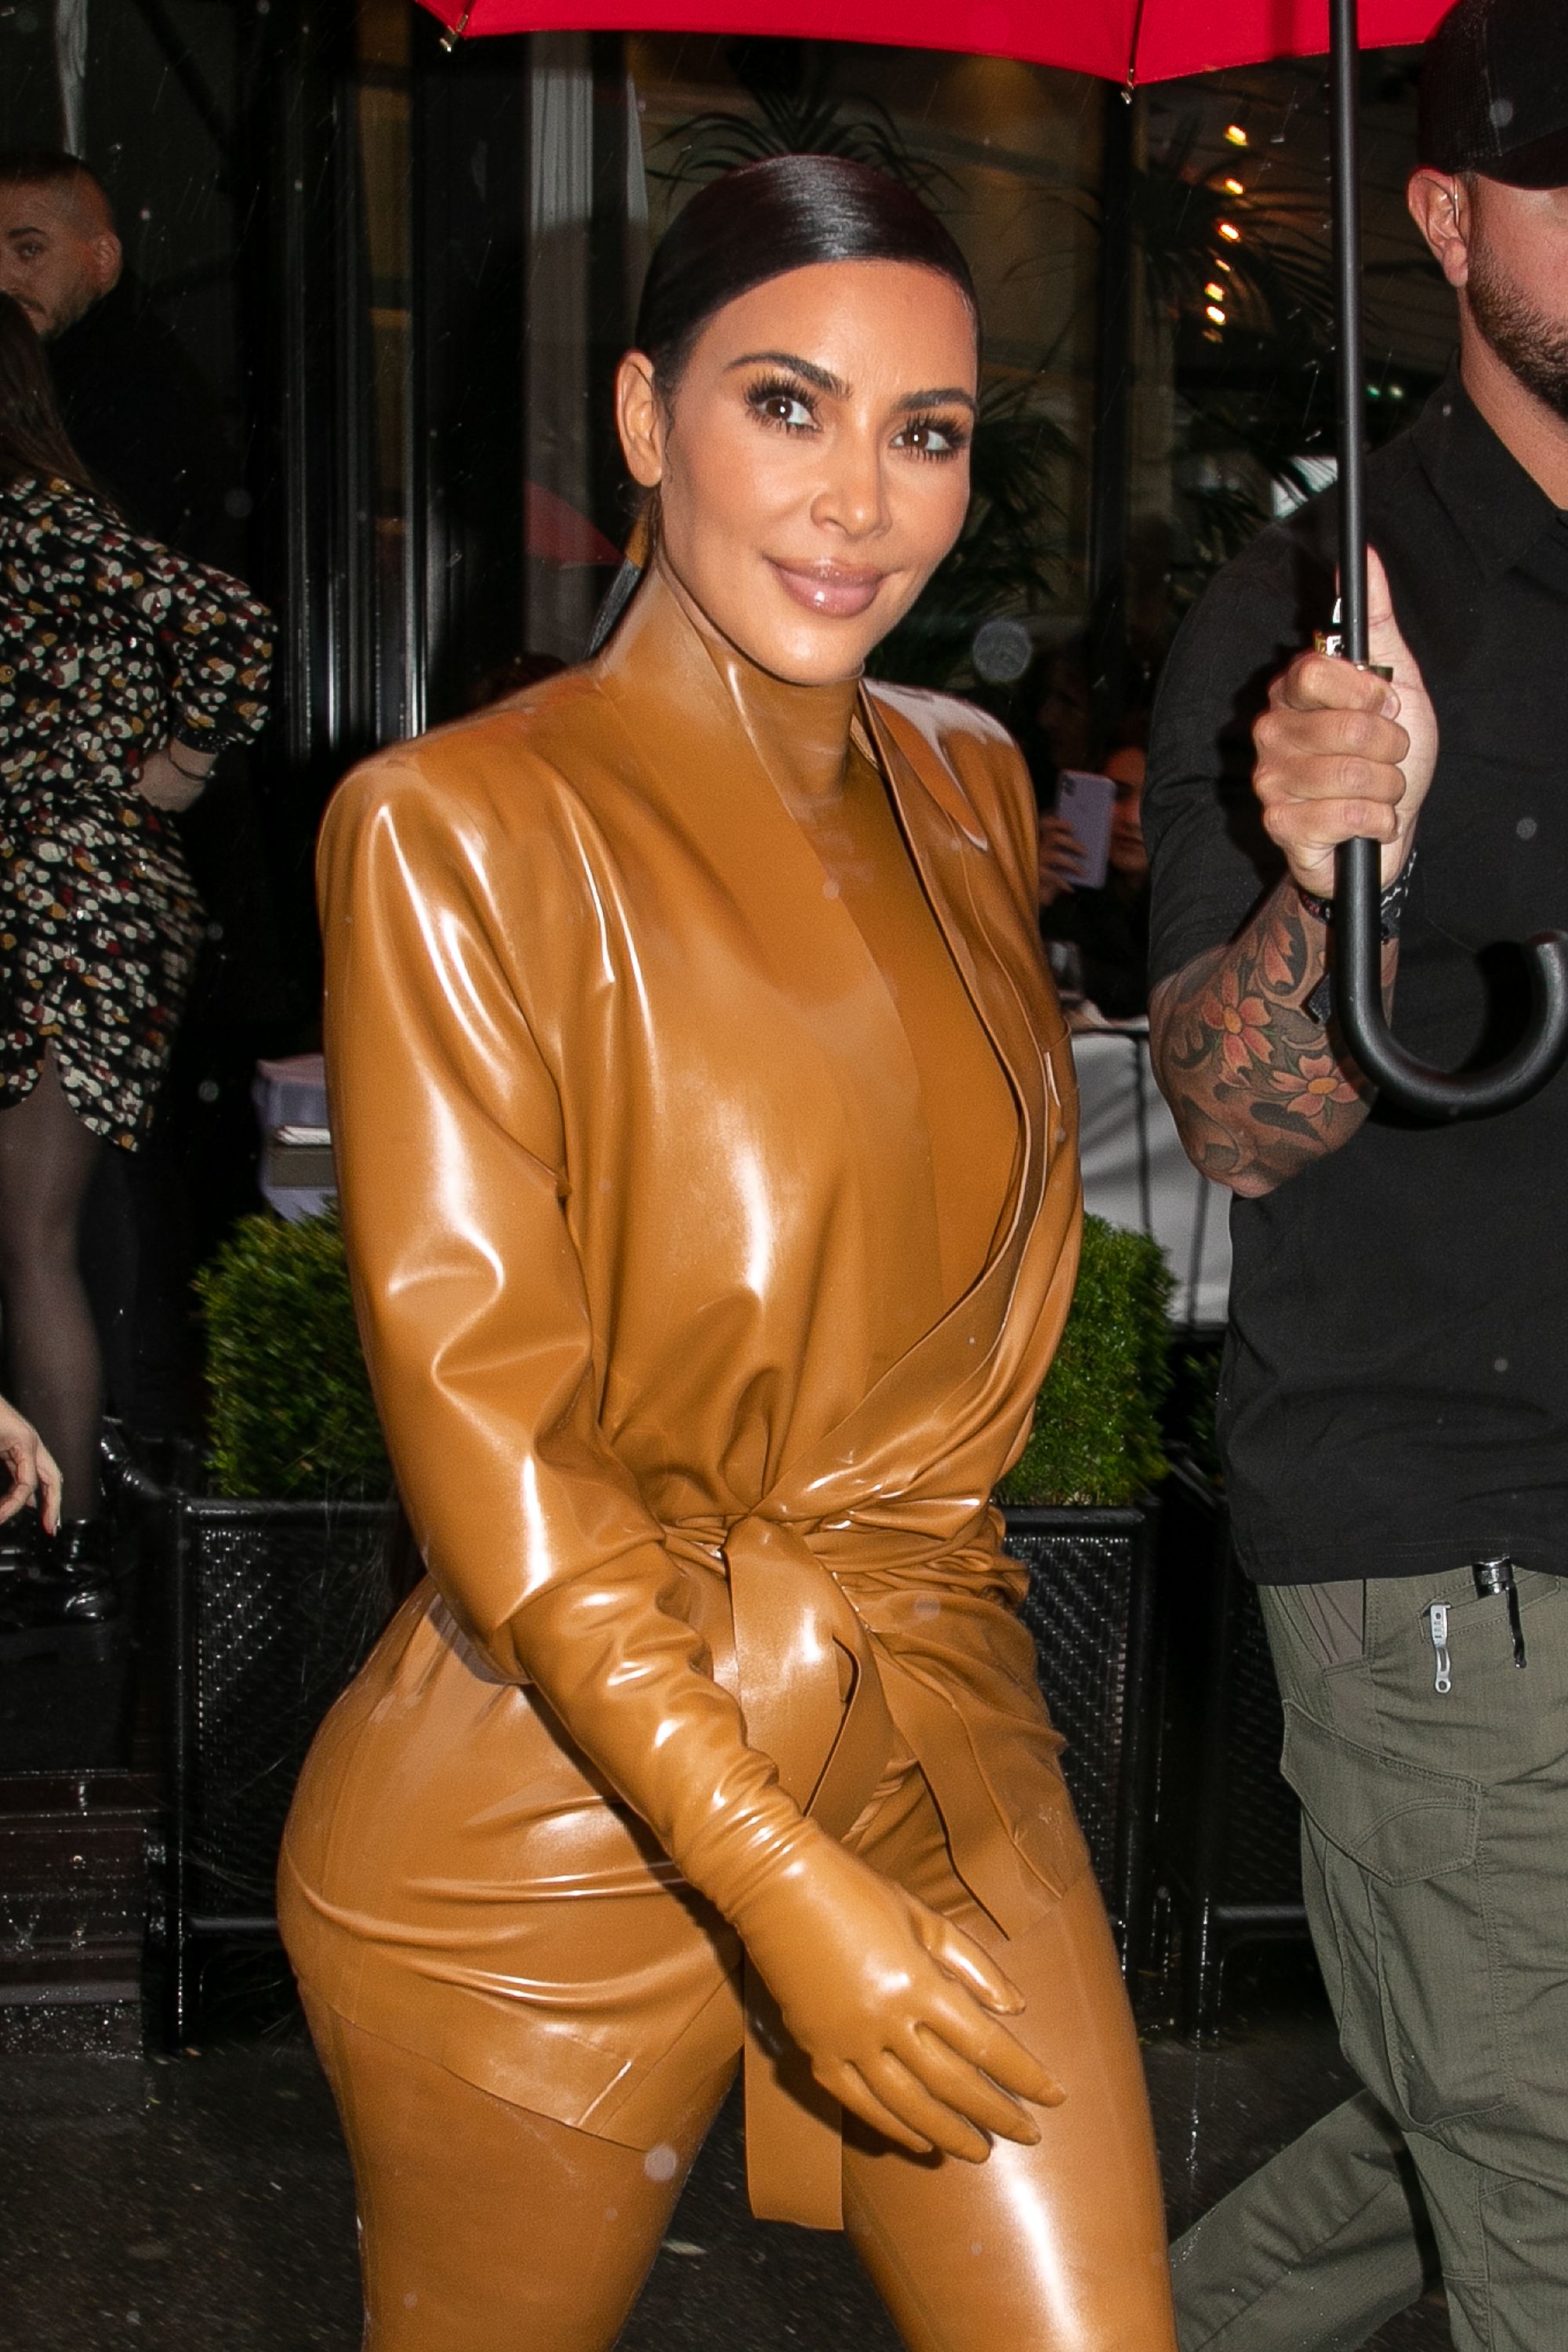 Kim Kardashian West by the L'Avenue restaurant on March 01, 2020 in Paris, France. | Source: Getty Images